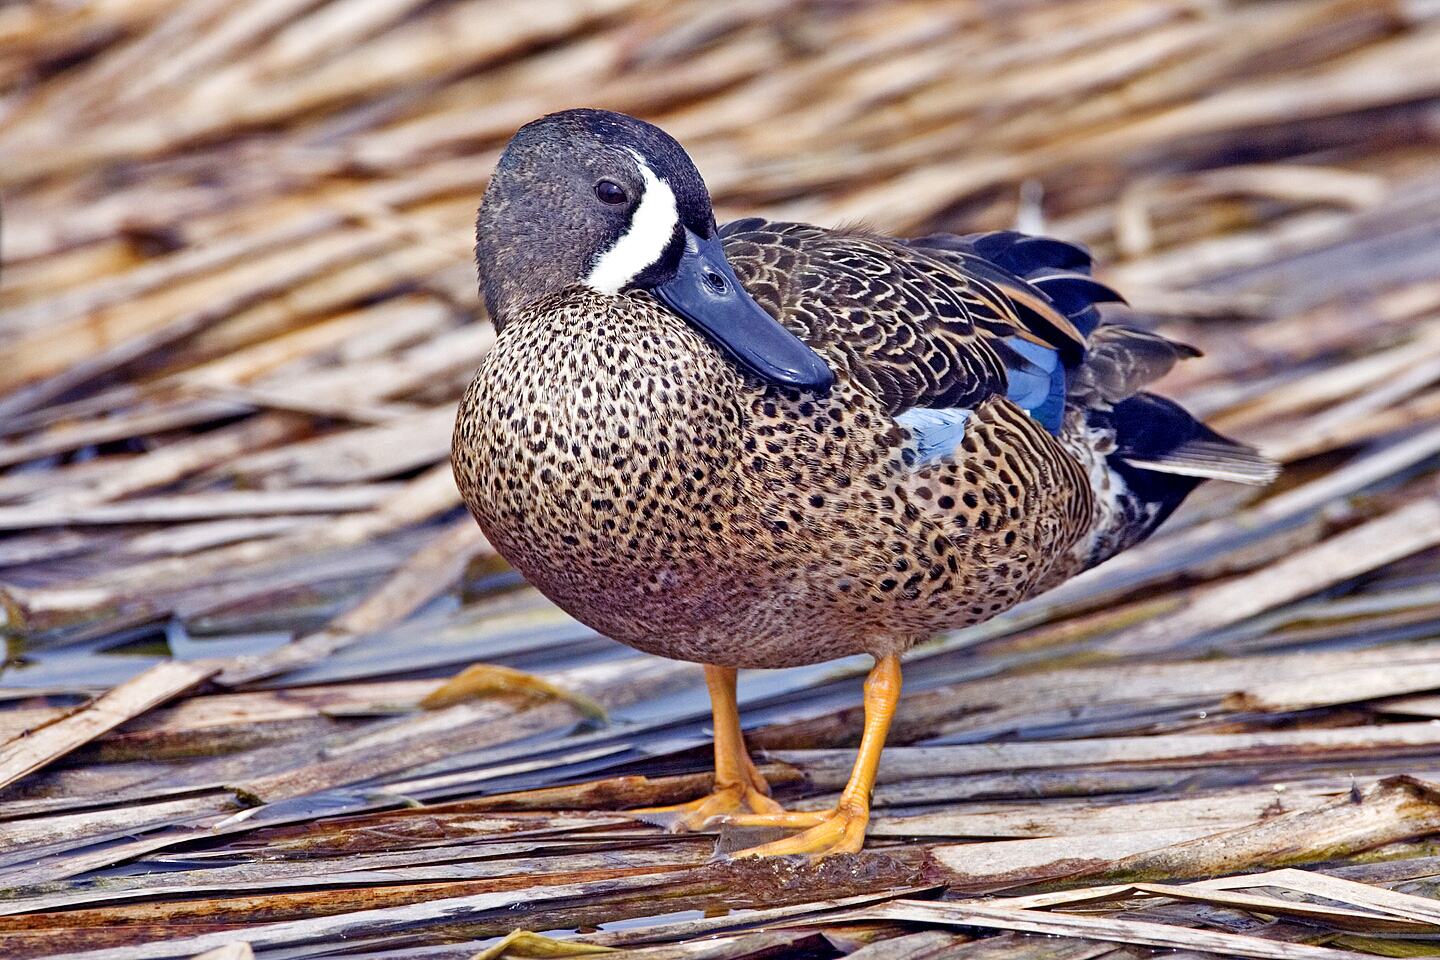 Blue-winged teal, scientific name Spatula discors